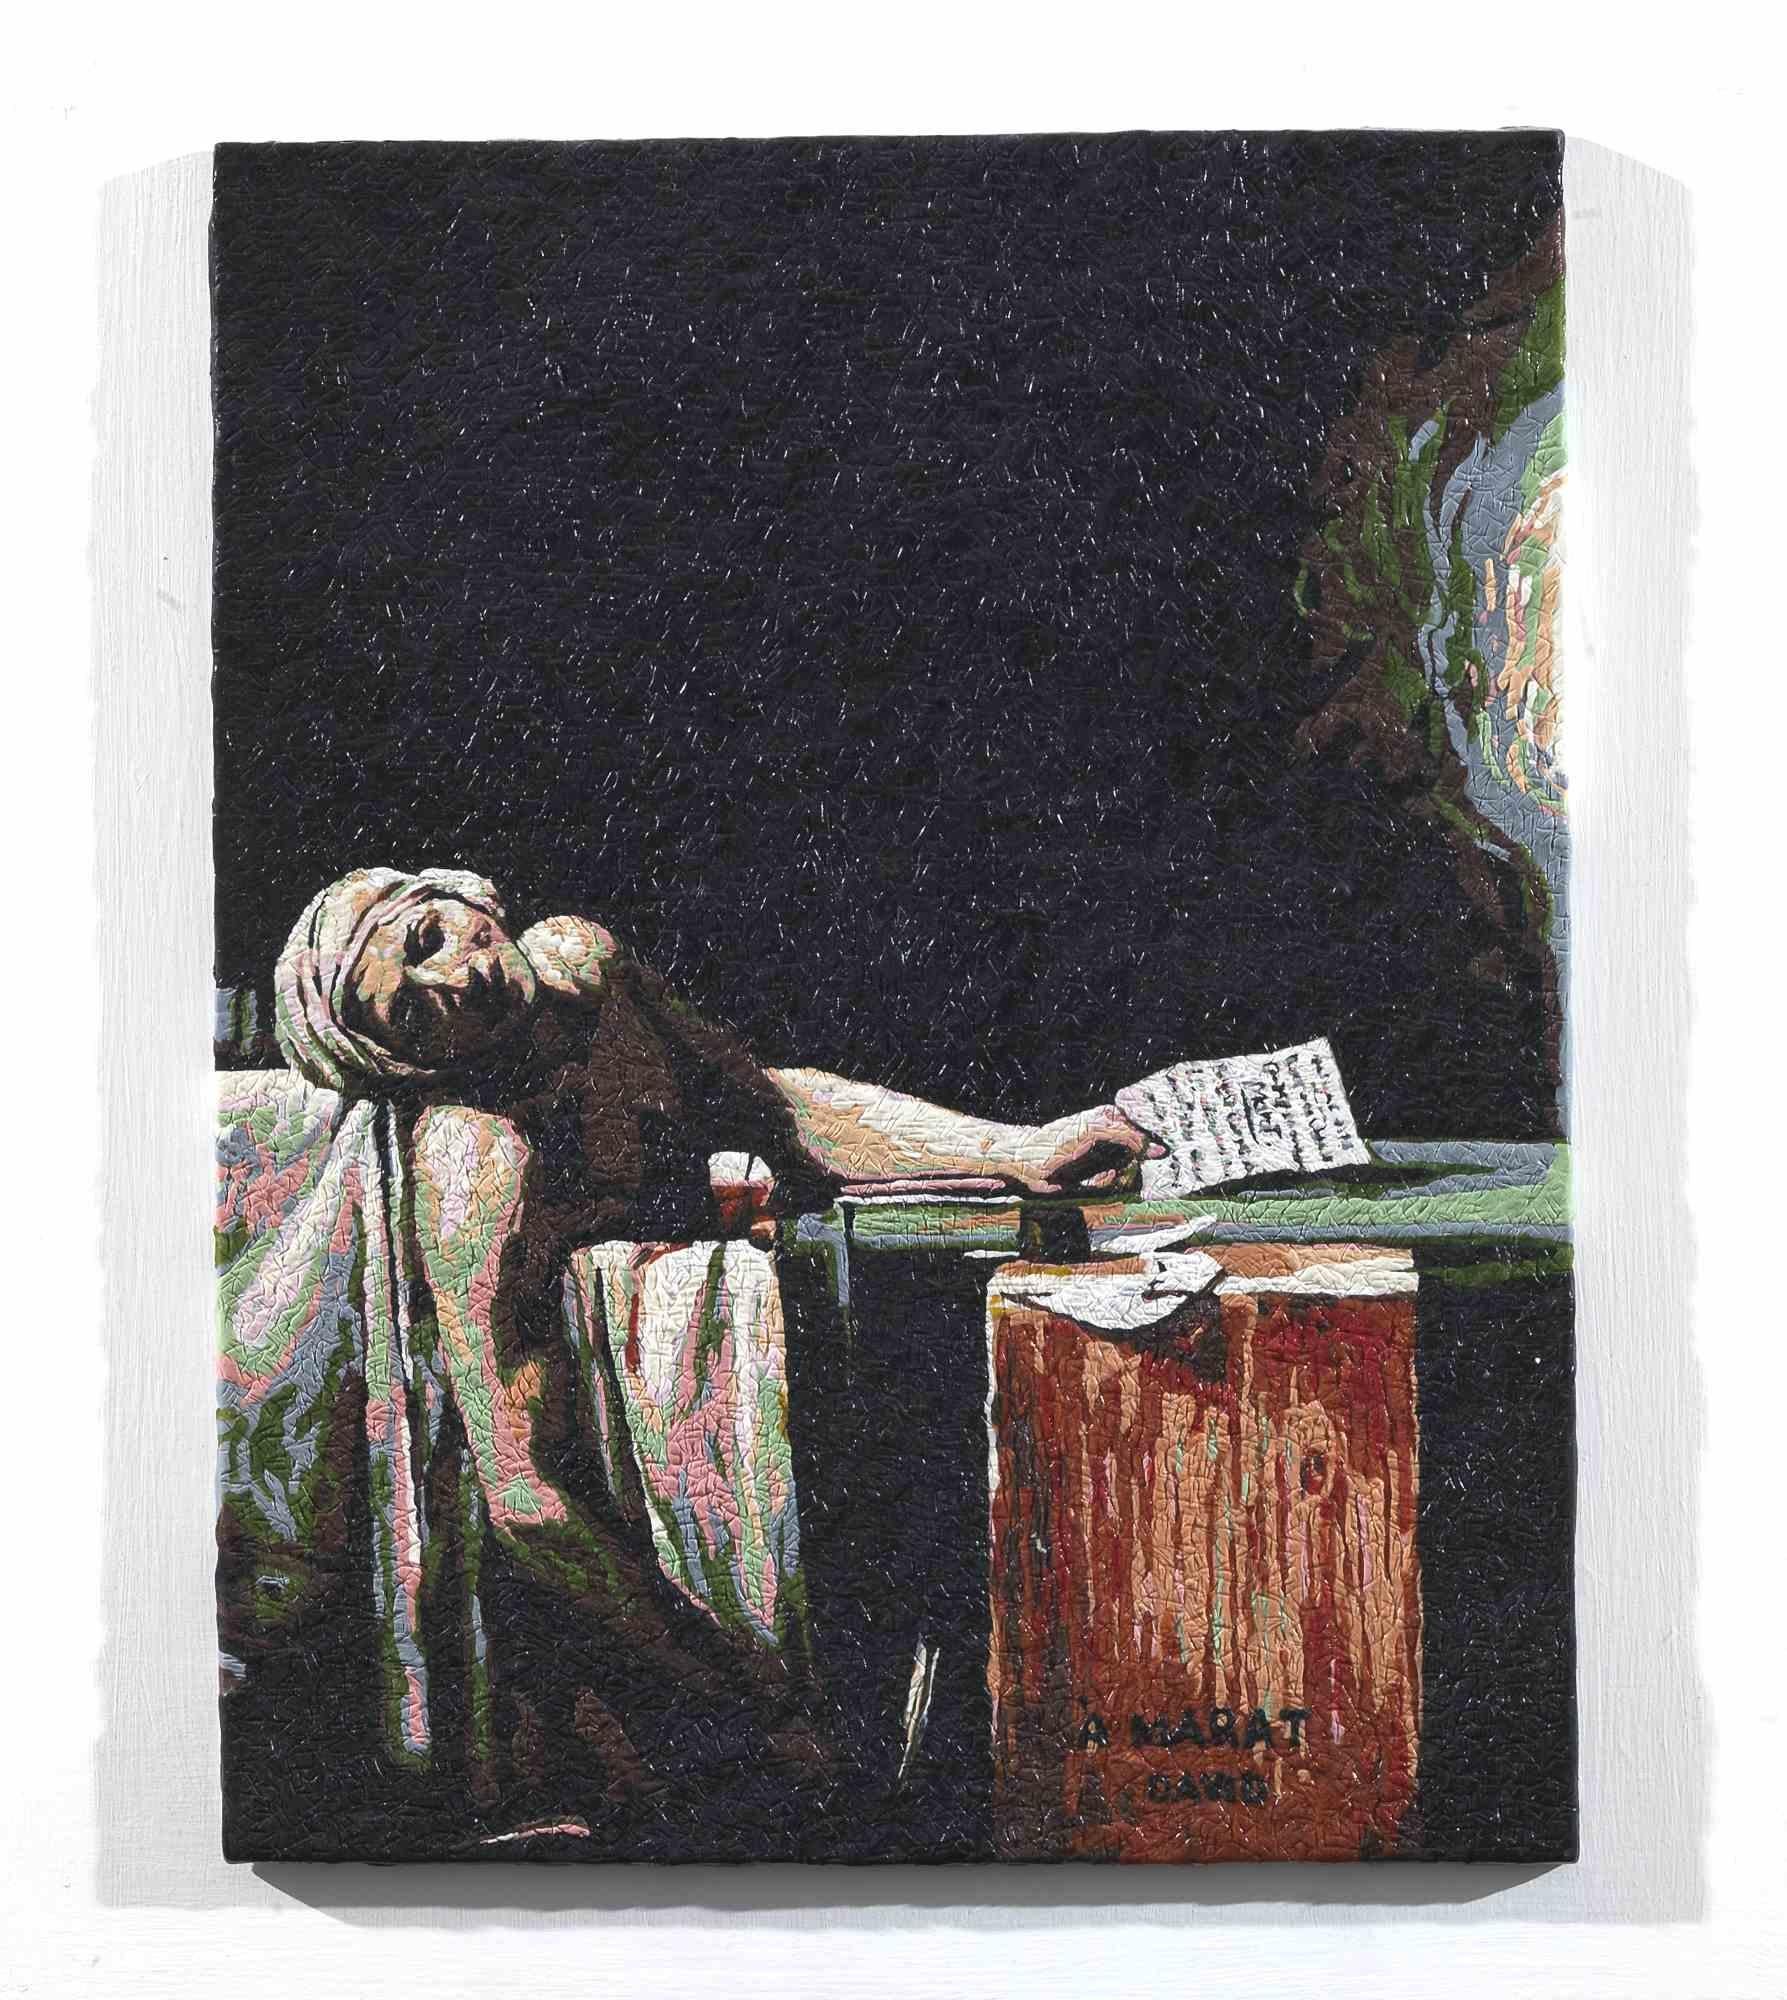 Marat is an original Contemporary Arwork realized by the Italian artist Maurizio Savini (b. Rome, 1962) in 2015. 

Original Encaustic of chewing gum on board. 

Hand-signed by the artist on the back of the canvas.

The Certificate of Authenticity is